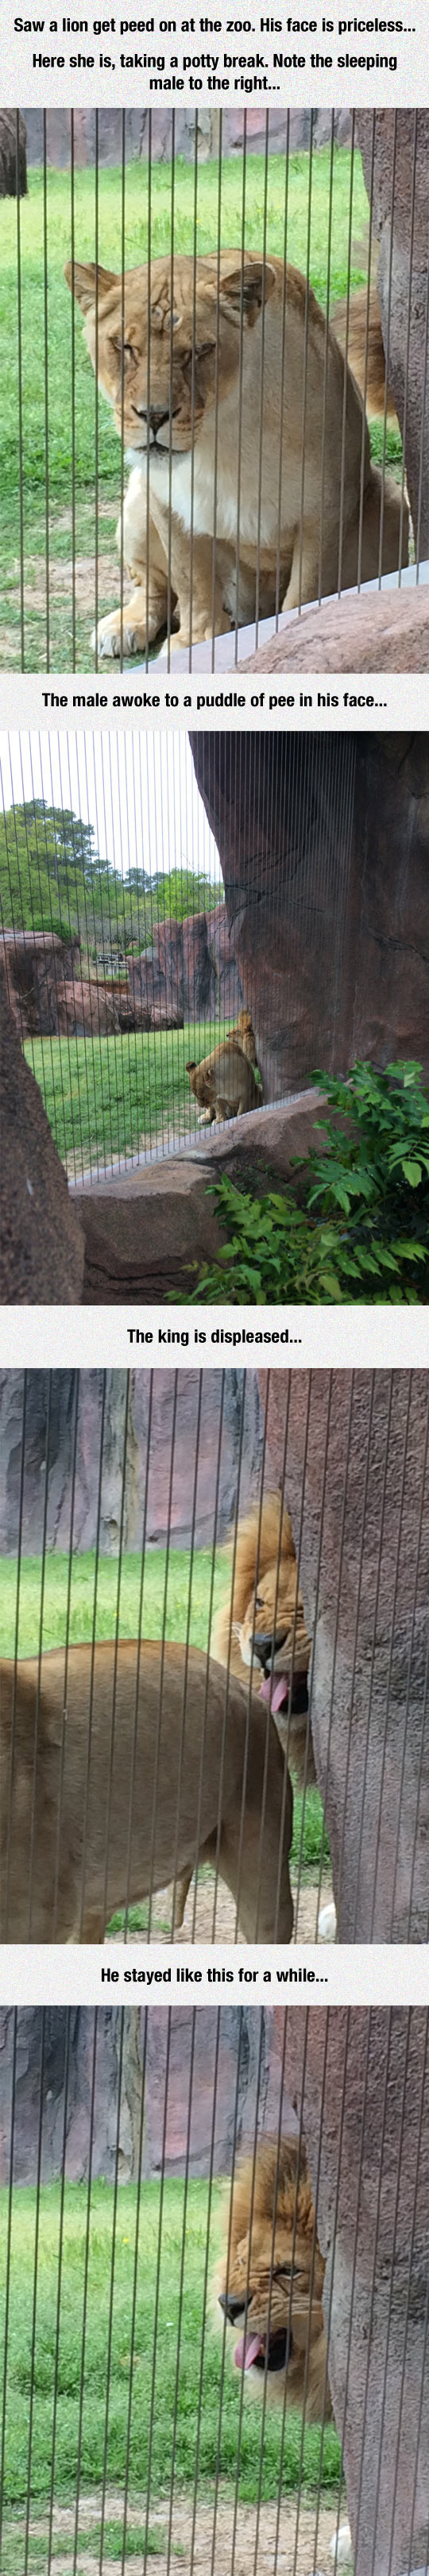 Disgust Of The King